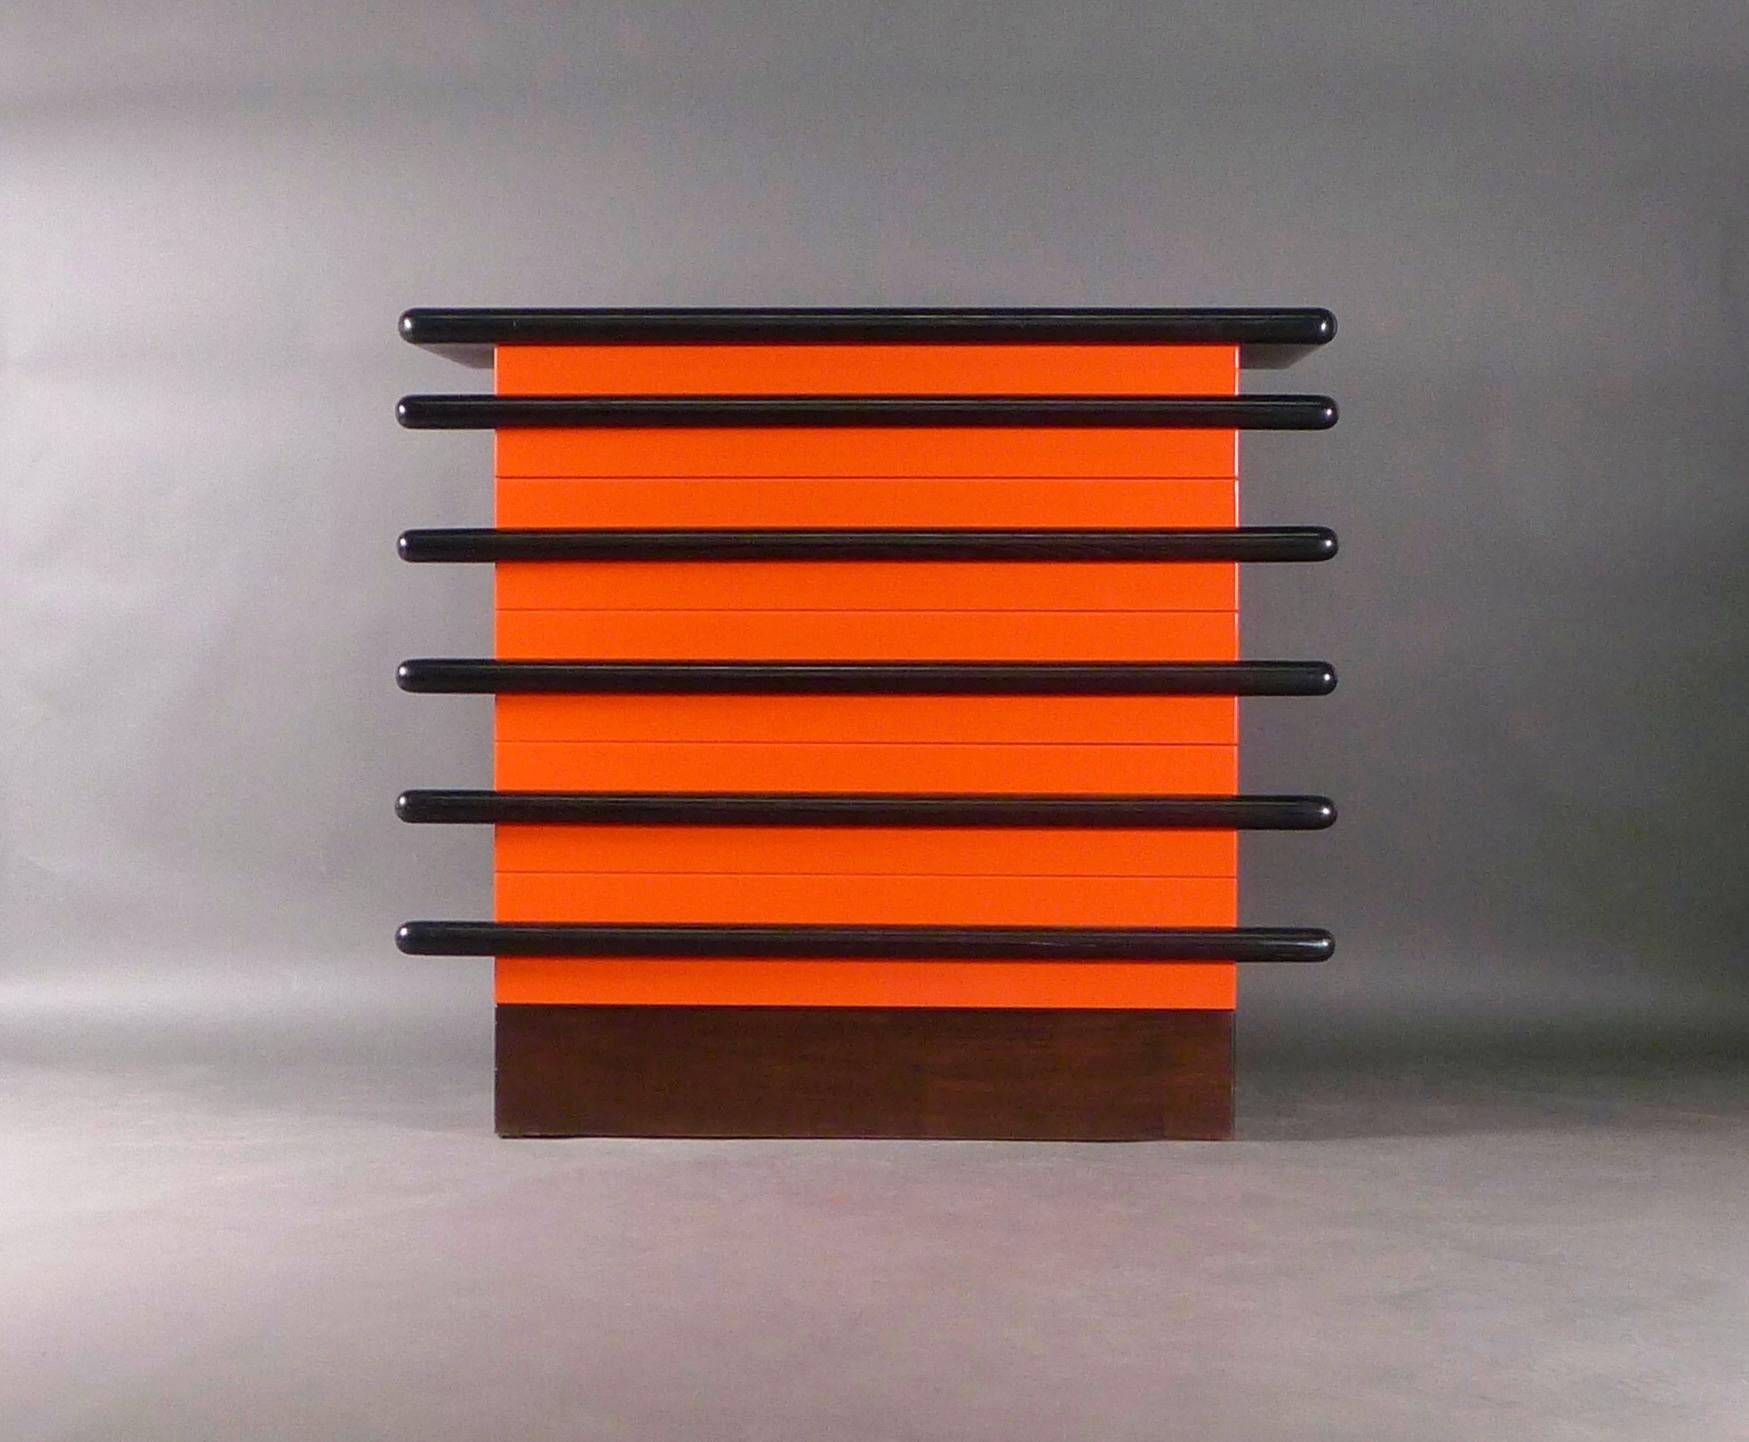 Ettore Sottsass 'Bastonio' chest of five drawers, designed 1963 and manufactured by Poltronovo, Agliana, Italy.

Constructed from Sipo and Beechwood with Indian Rosewood veneer and black and red lacquered ash.  

101cm high, 112cm wide, 60cm deep